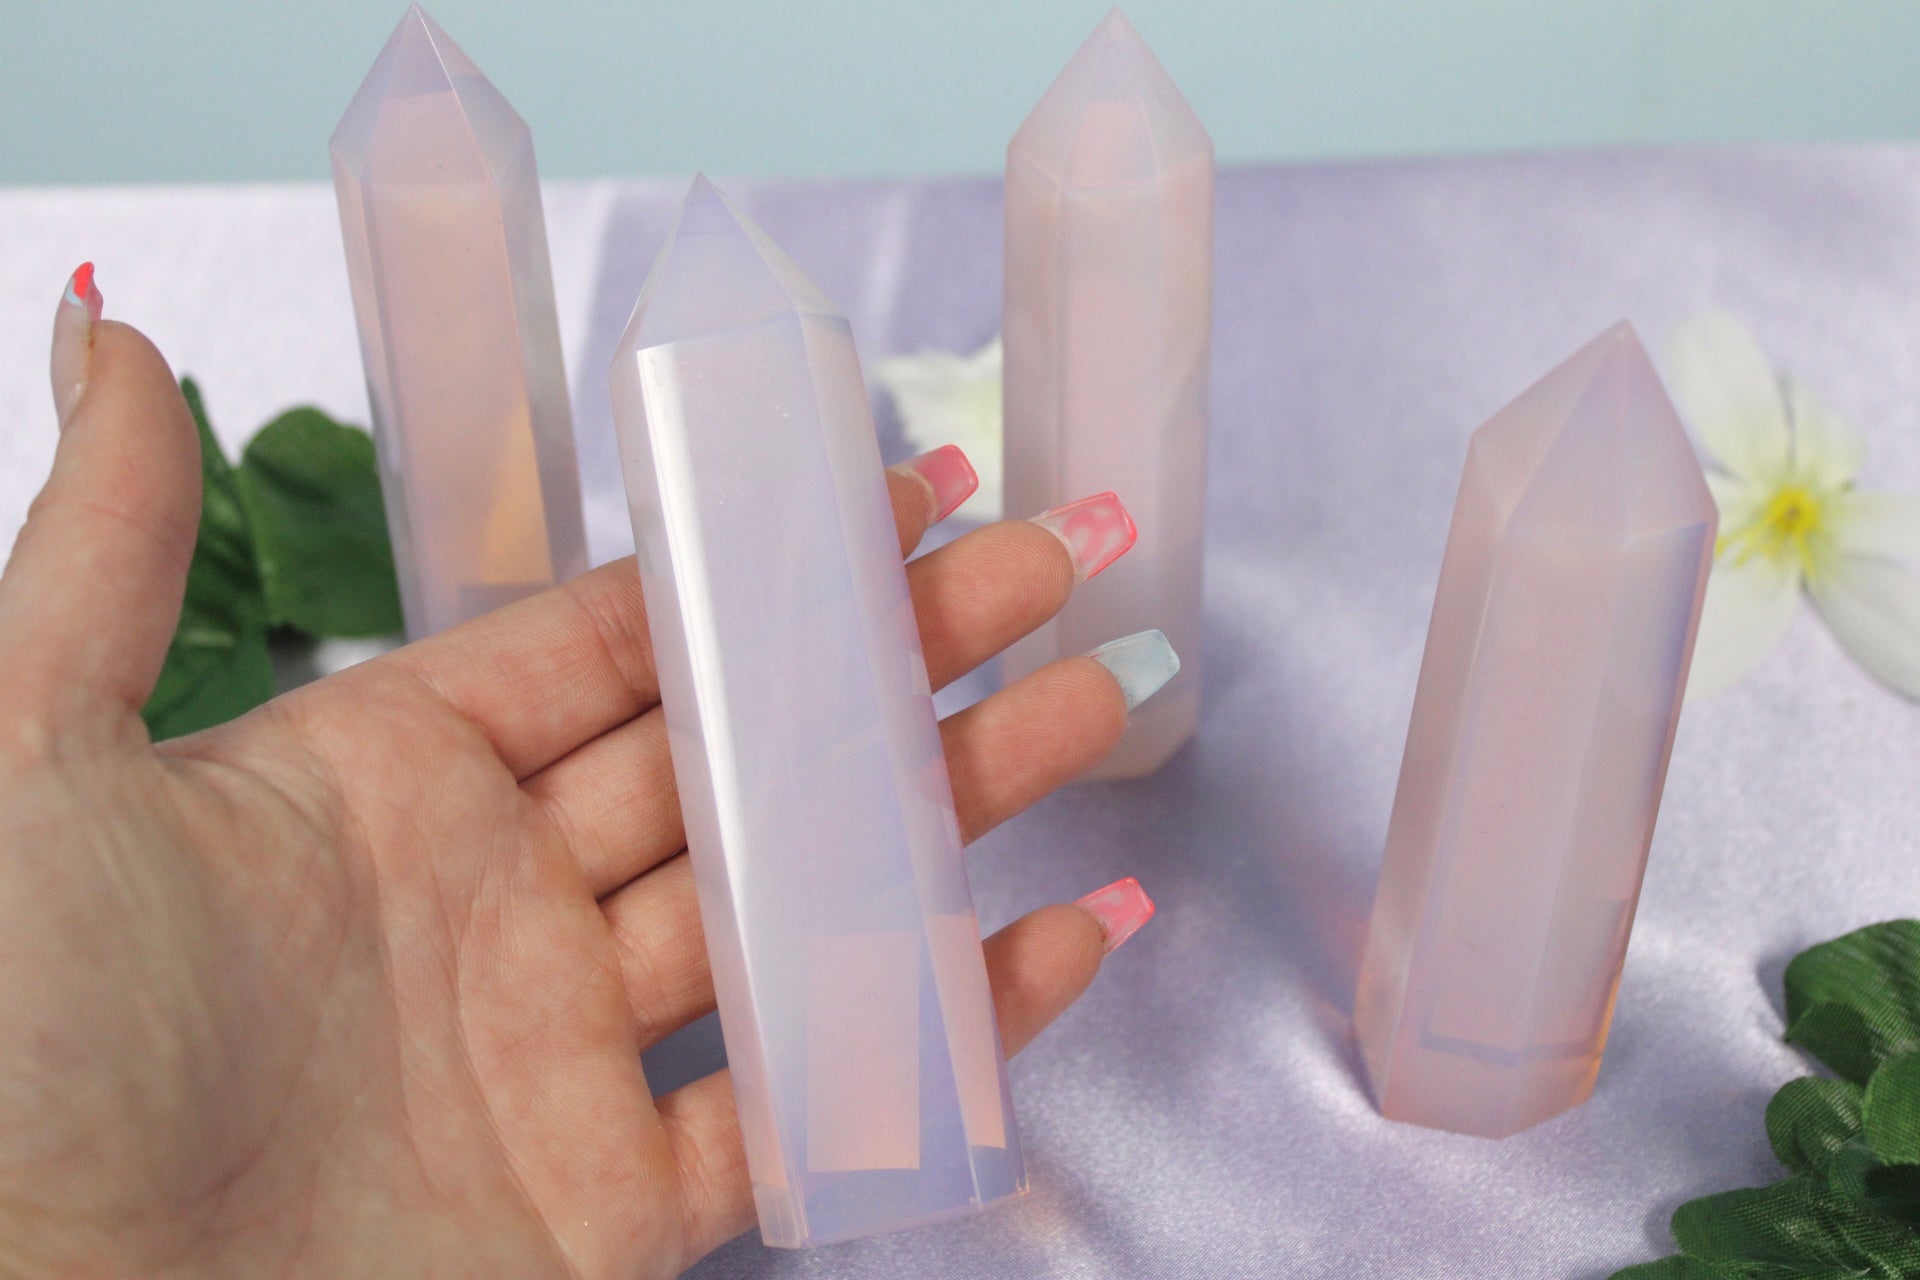 Pink Opalite Point